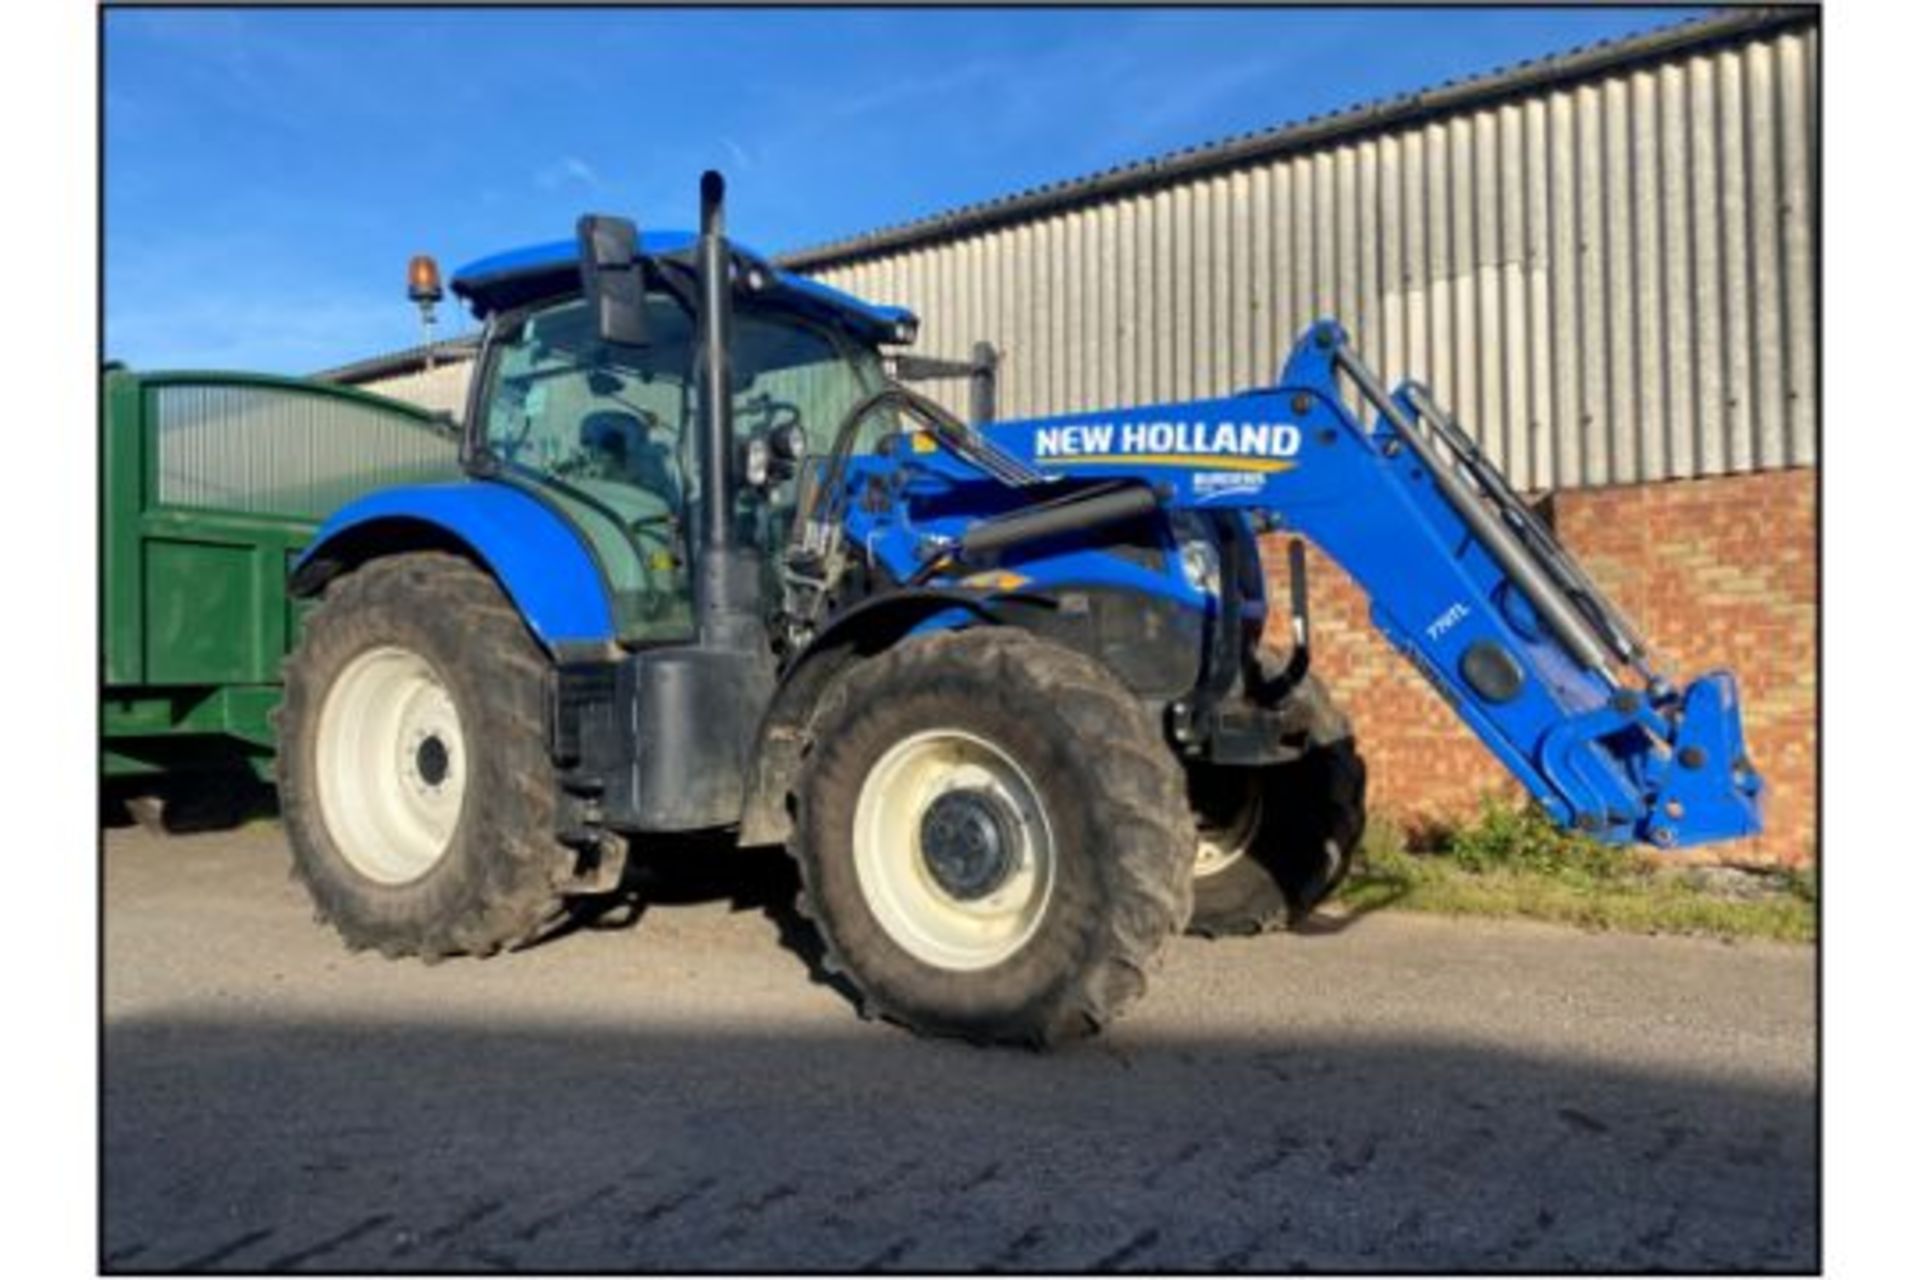 2018 New Holland T7 210 4WD, FX18 FKW 01/07/18, Serial HACT7210CJE101620, 2449hrs, c/w front loader,